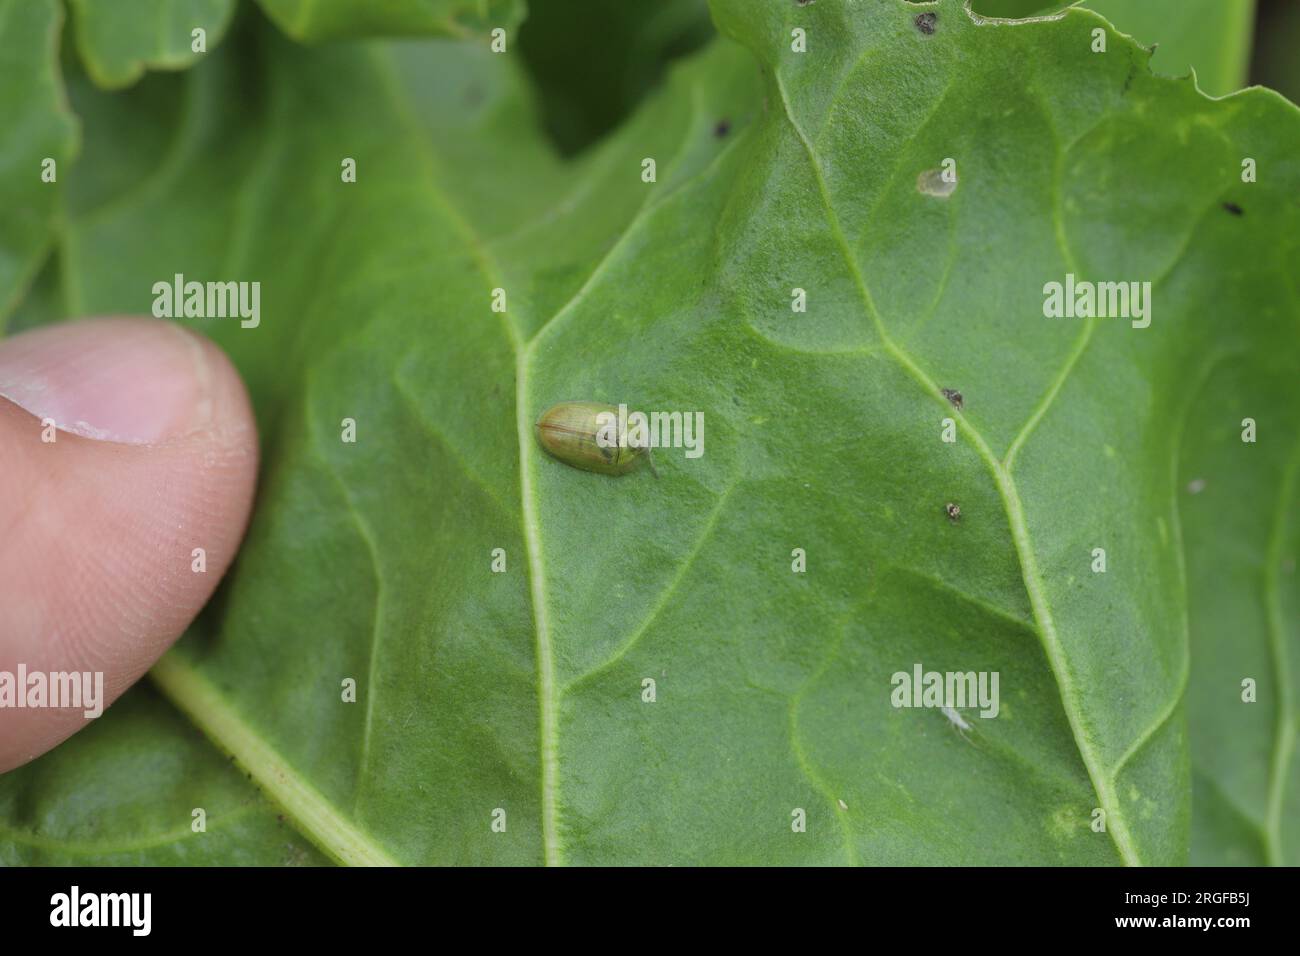 Green Tortoise Beetle Cassida sp. from above on a sugar beet leaf in a crop field. Stock Photo